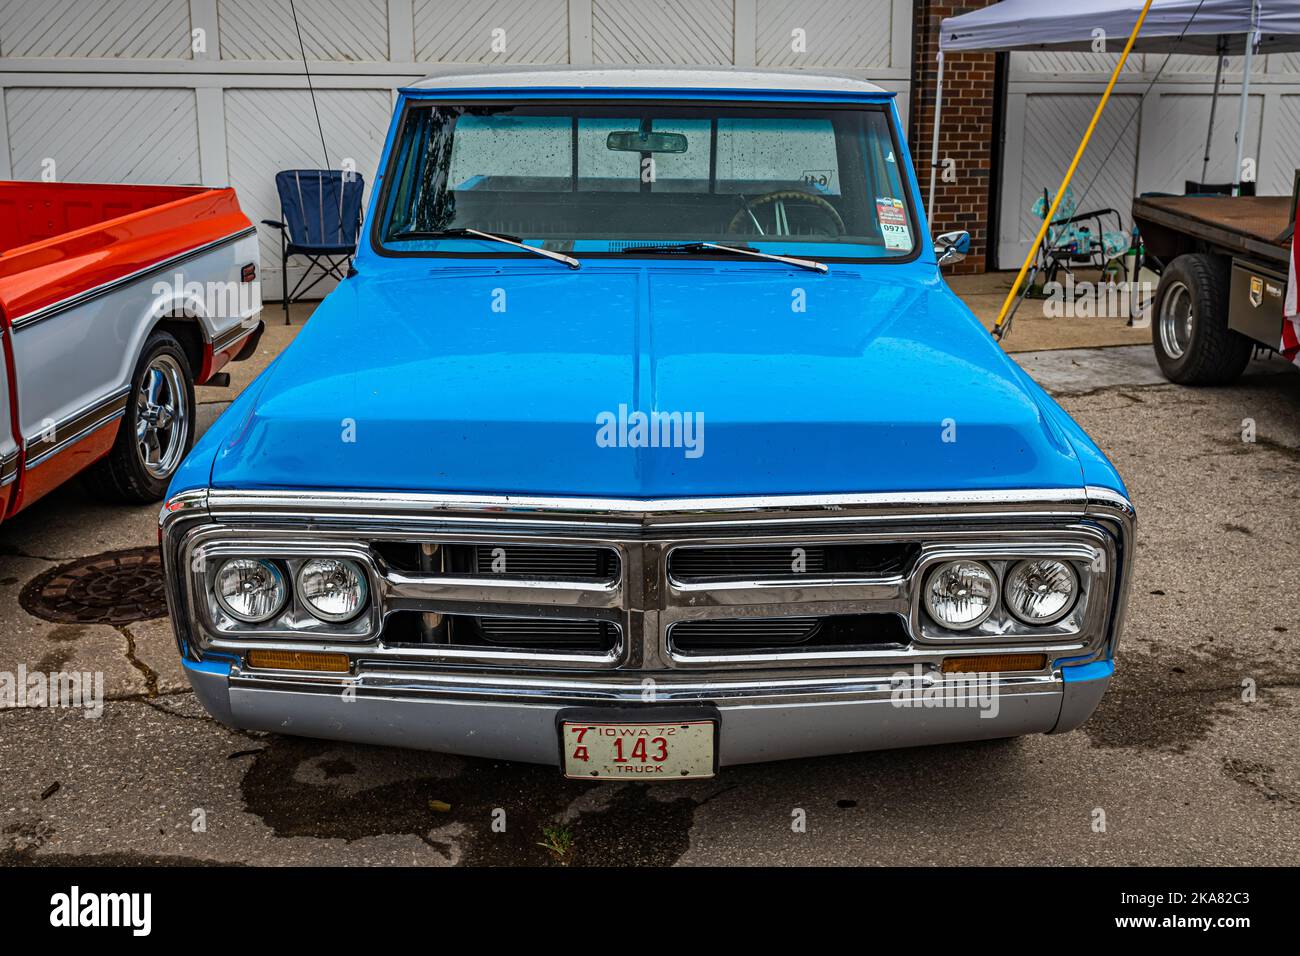 Des Moines, IA - July 01, 2022: High perspective front view of a 1972 GMC C10 Pickup Truck at a local car show. Stock Photo